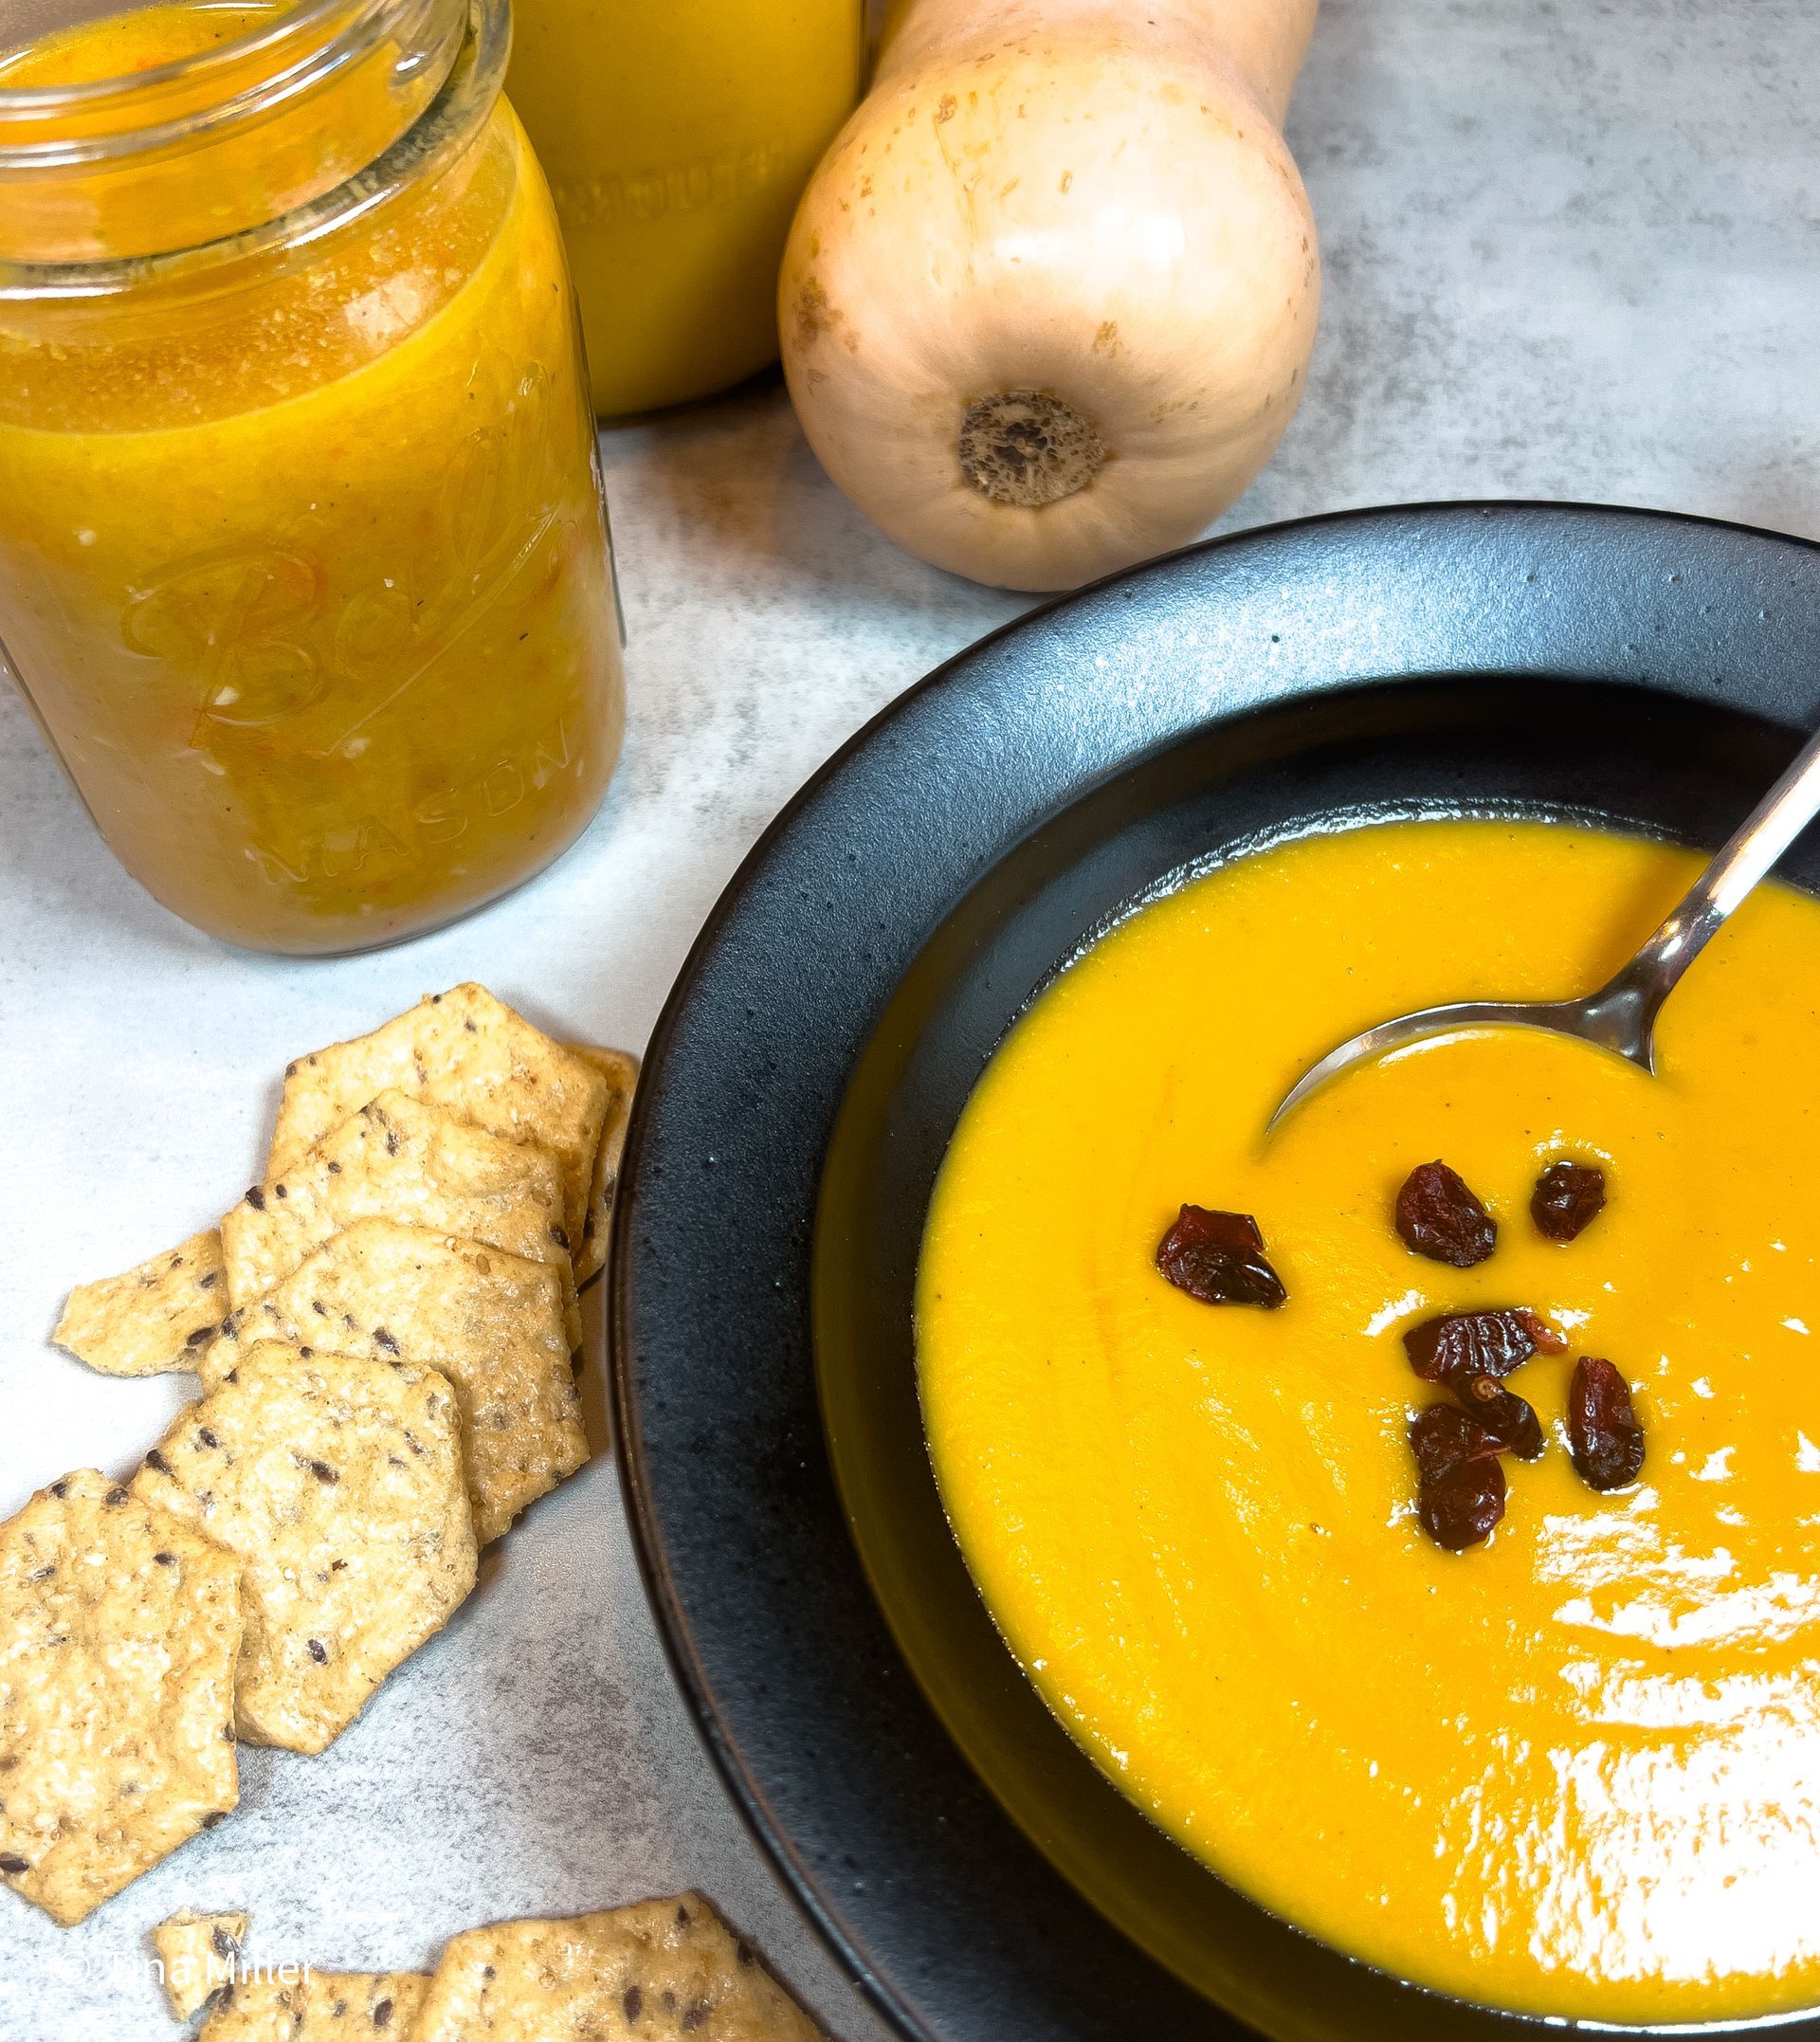 Butternut squash bisque in a black bowl with a spoon, garnished with plump crasins. Crackers and two jars of bisque along with a butternut squash all sitting on the surface by the bowl.